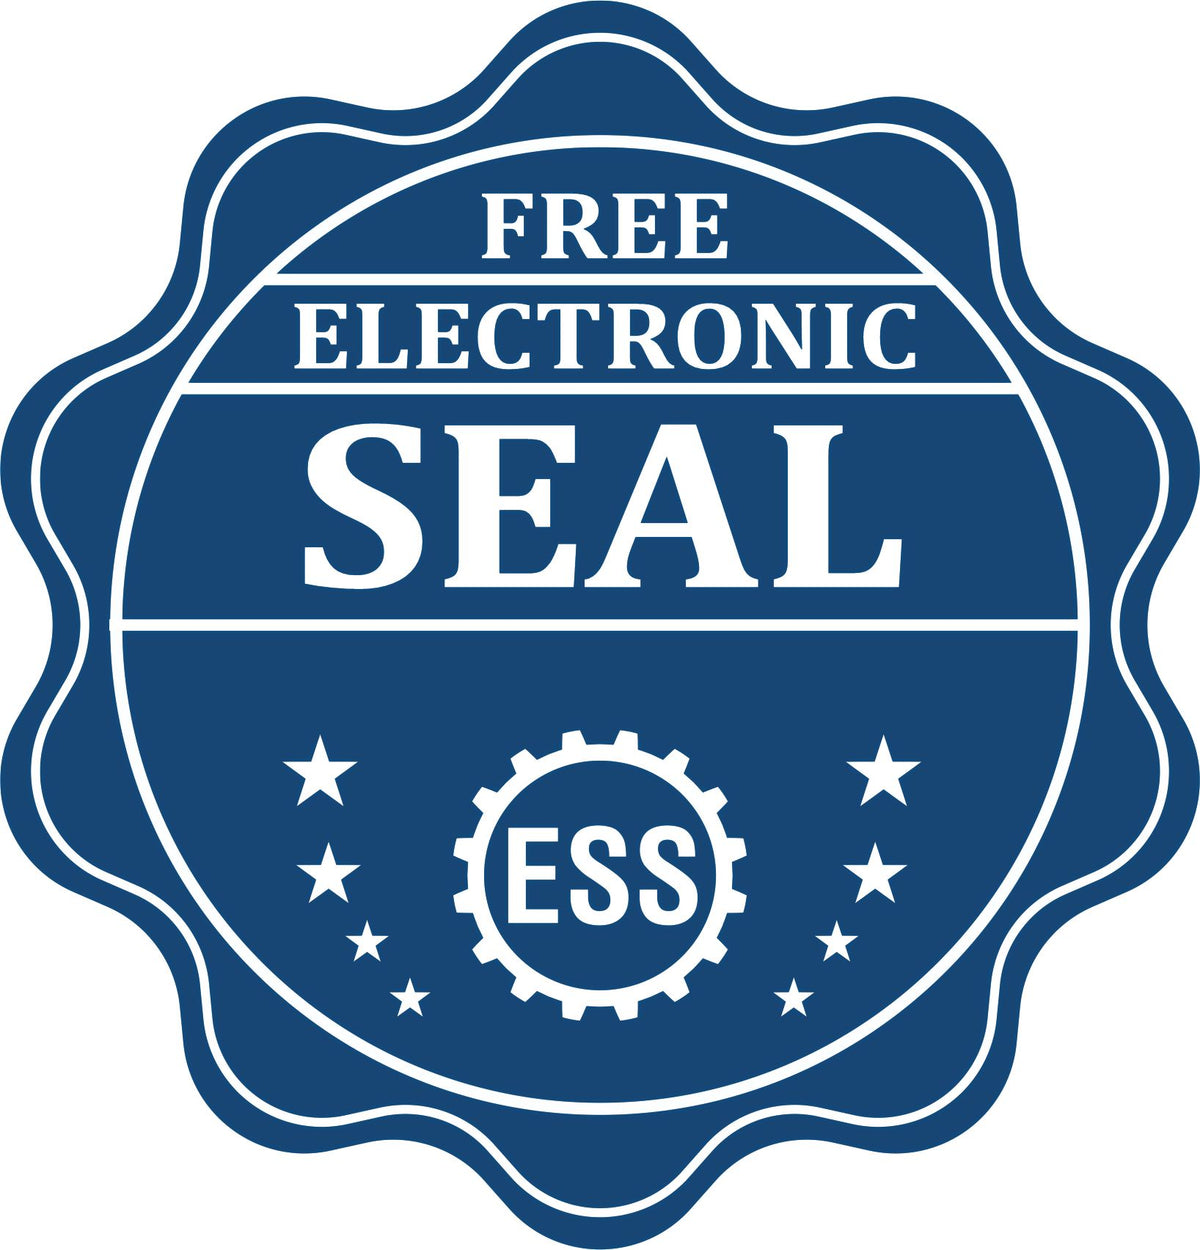 A badge showing a free electronic seal for the Idaho Desk Architect Embossing Seal with stars and the ESS gear on the emblem.